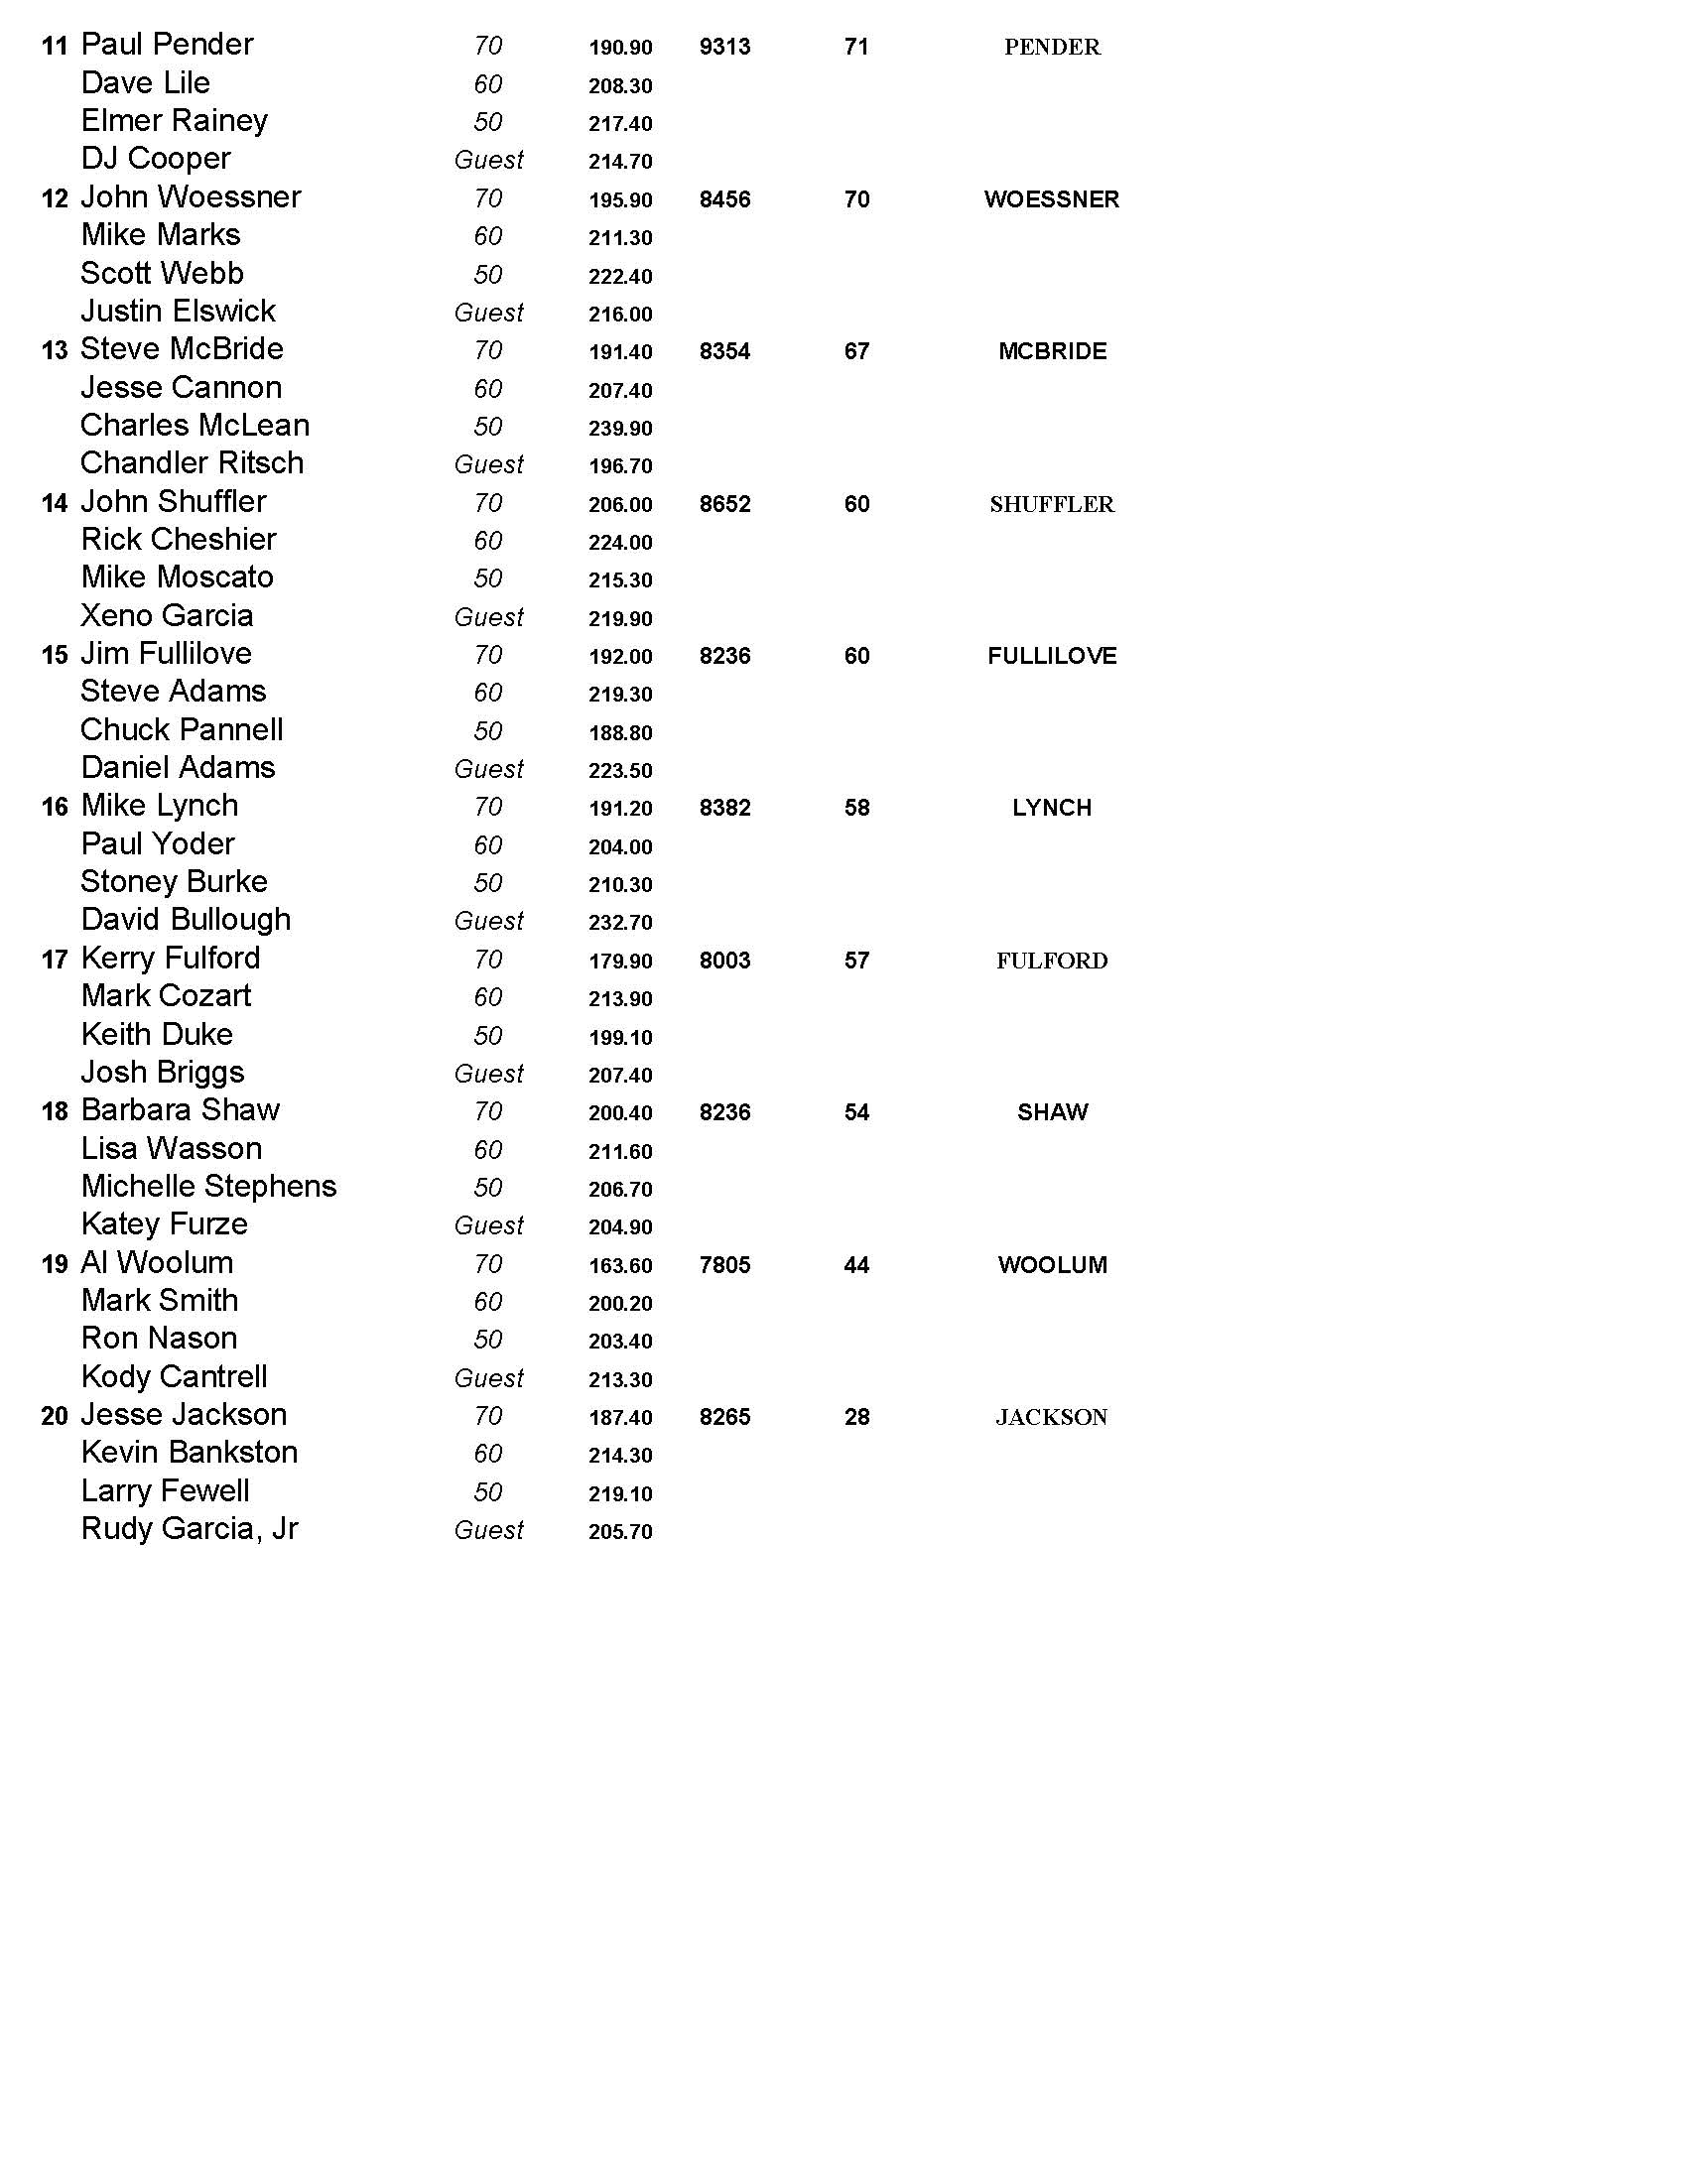 03312024results_Page_2